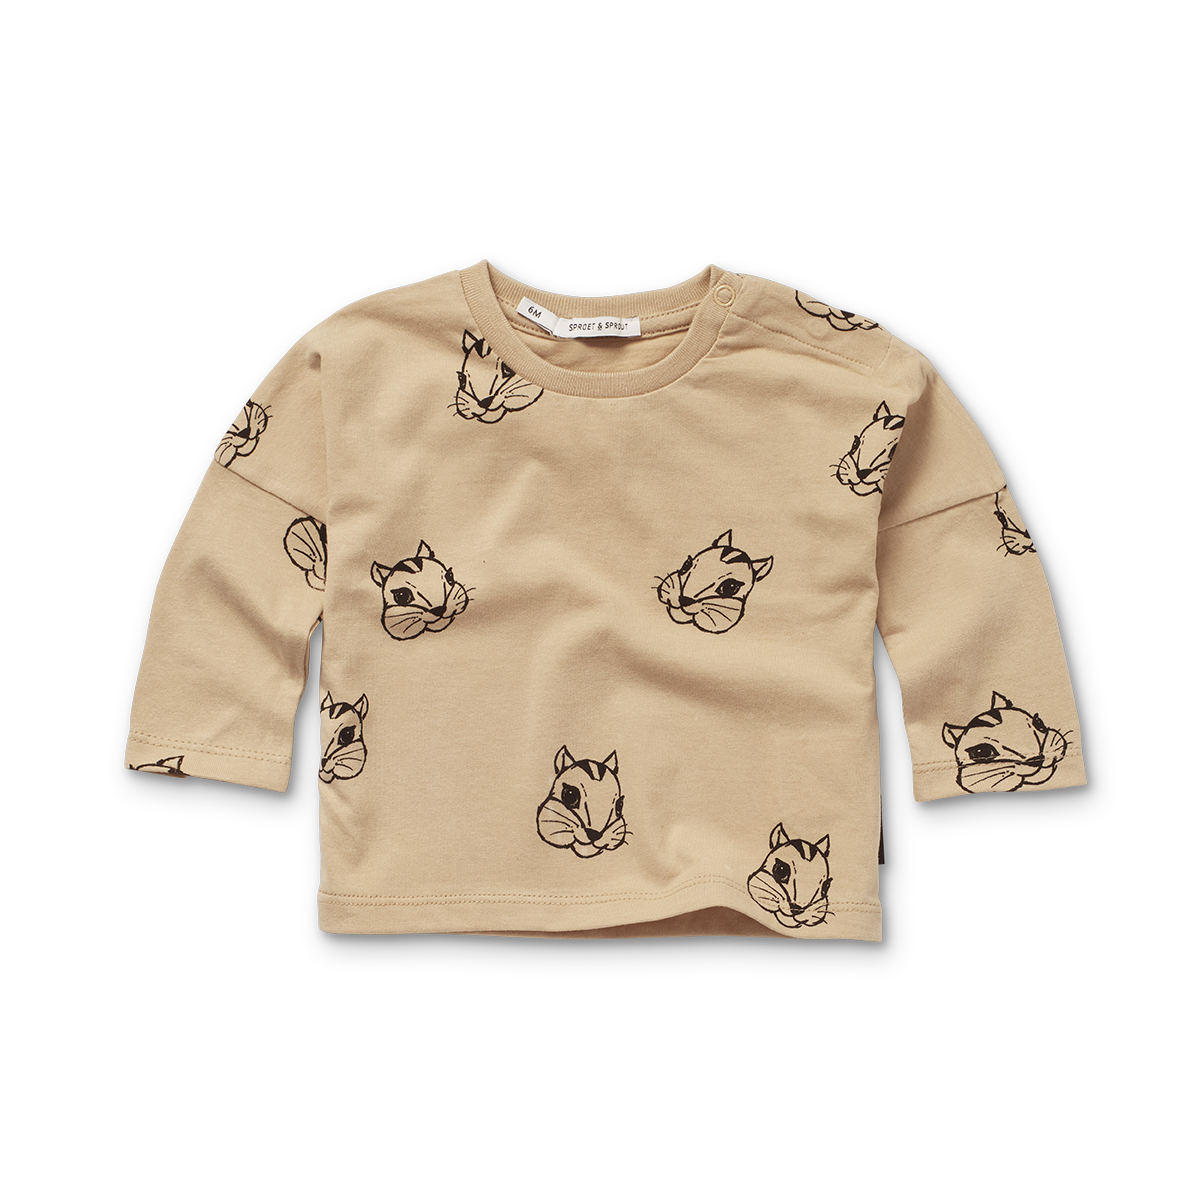 Loose T-shirt squirrel print - Sproet Sprout